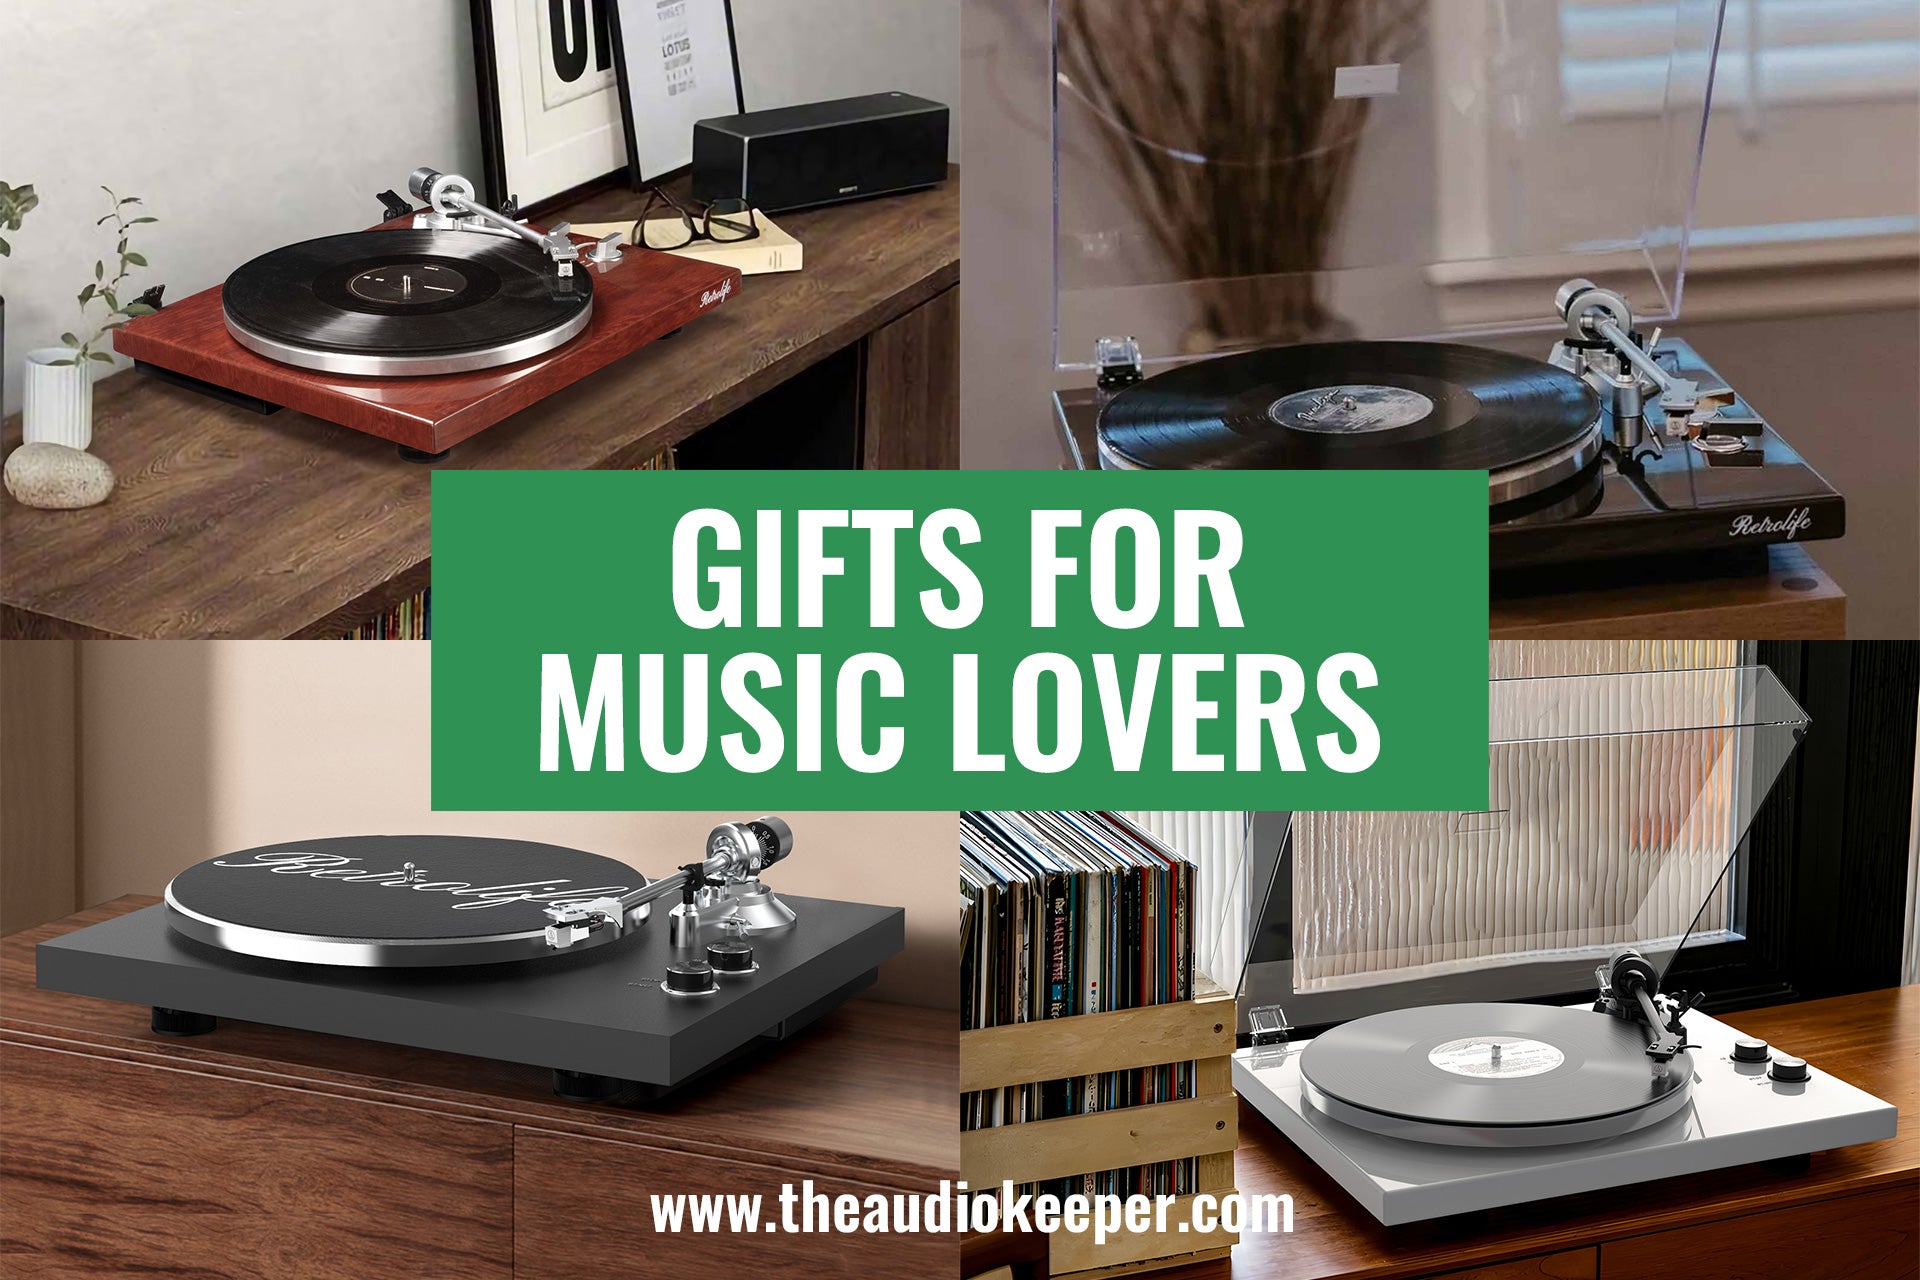 Why are Audio Keeper Hi-Fi Turntables a Great Gift Choice